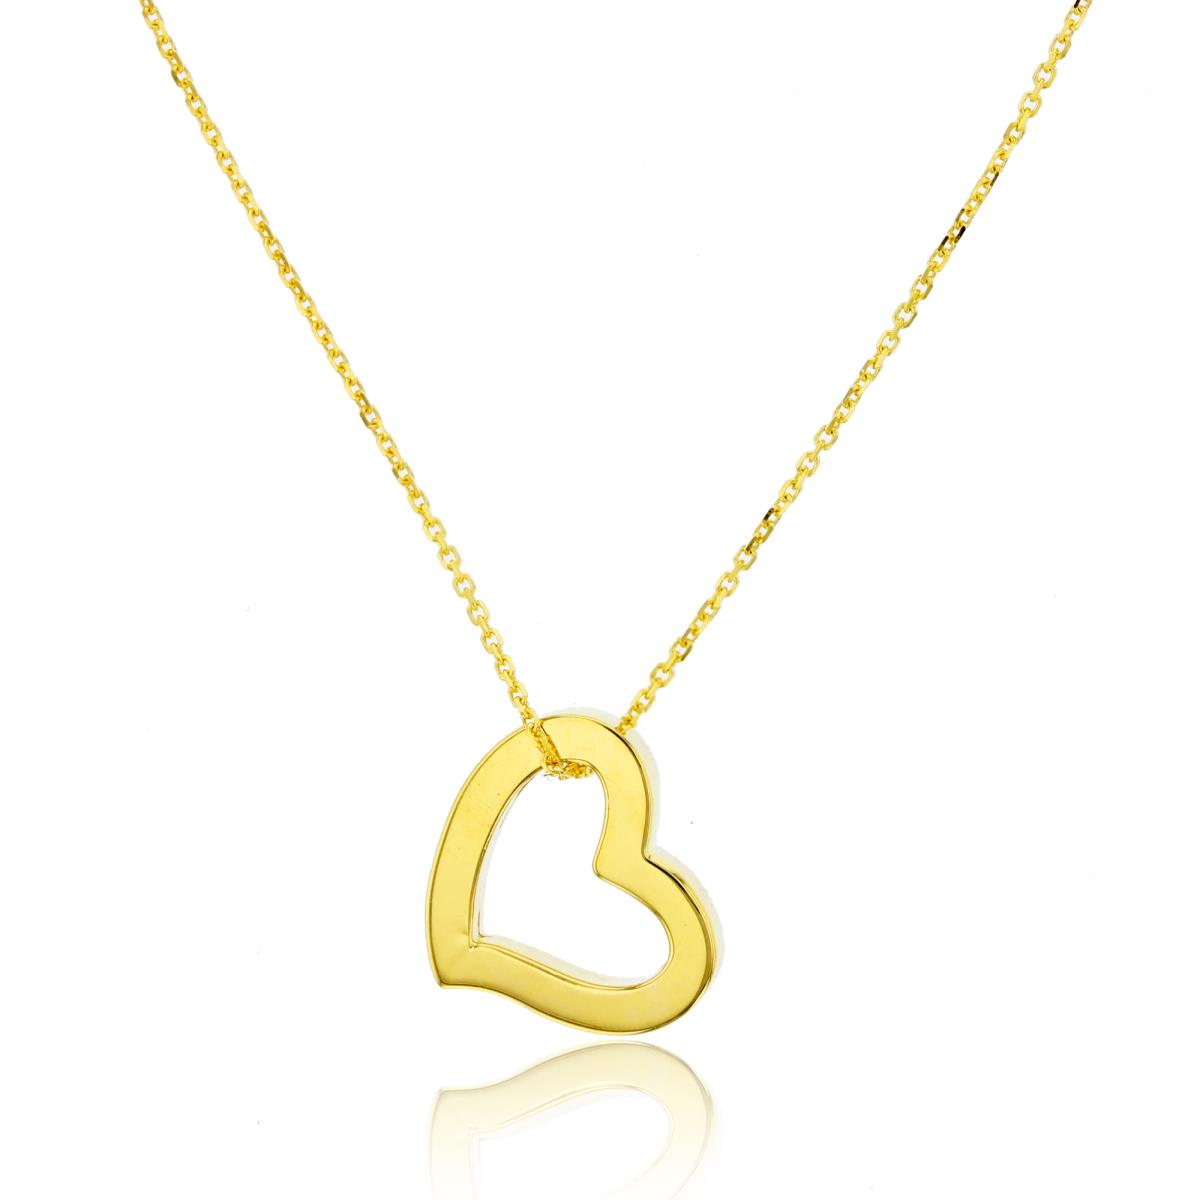 10K Yellow Gold 17" Cable Chain With Heart Pendant Necklace